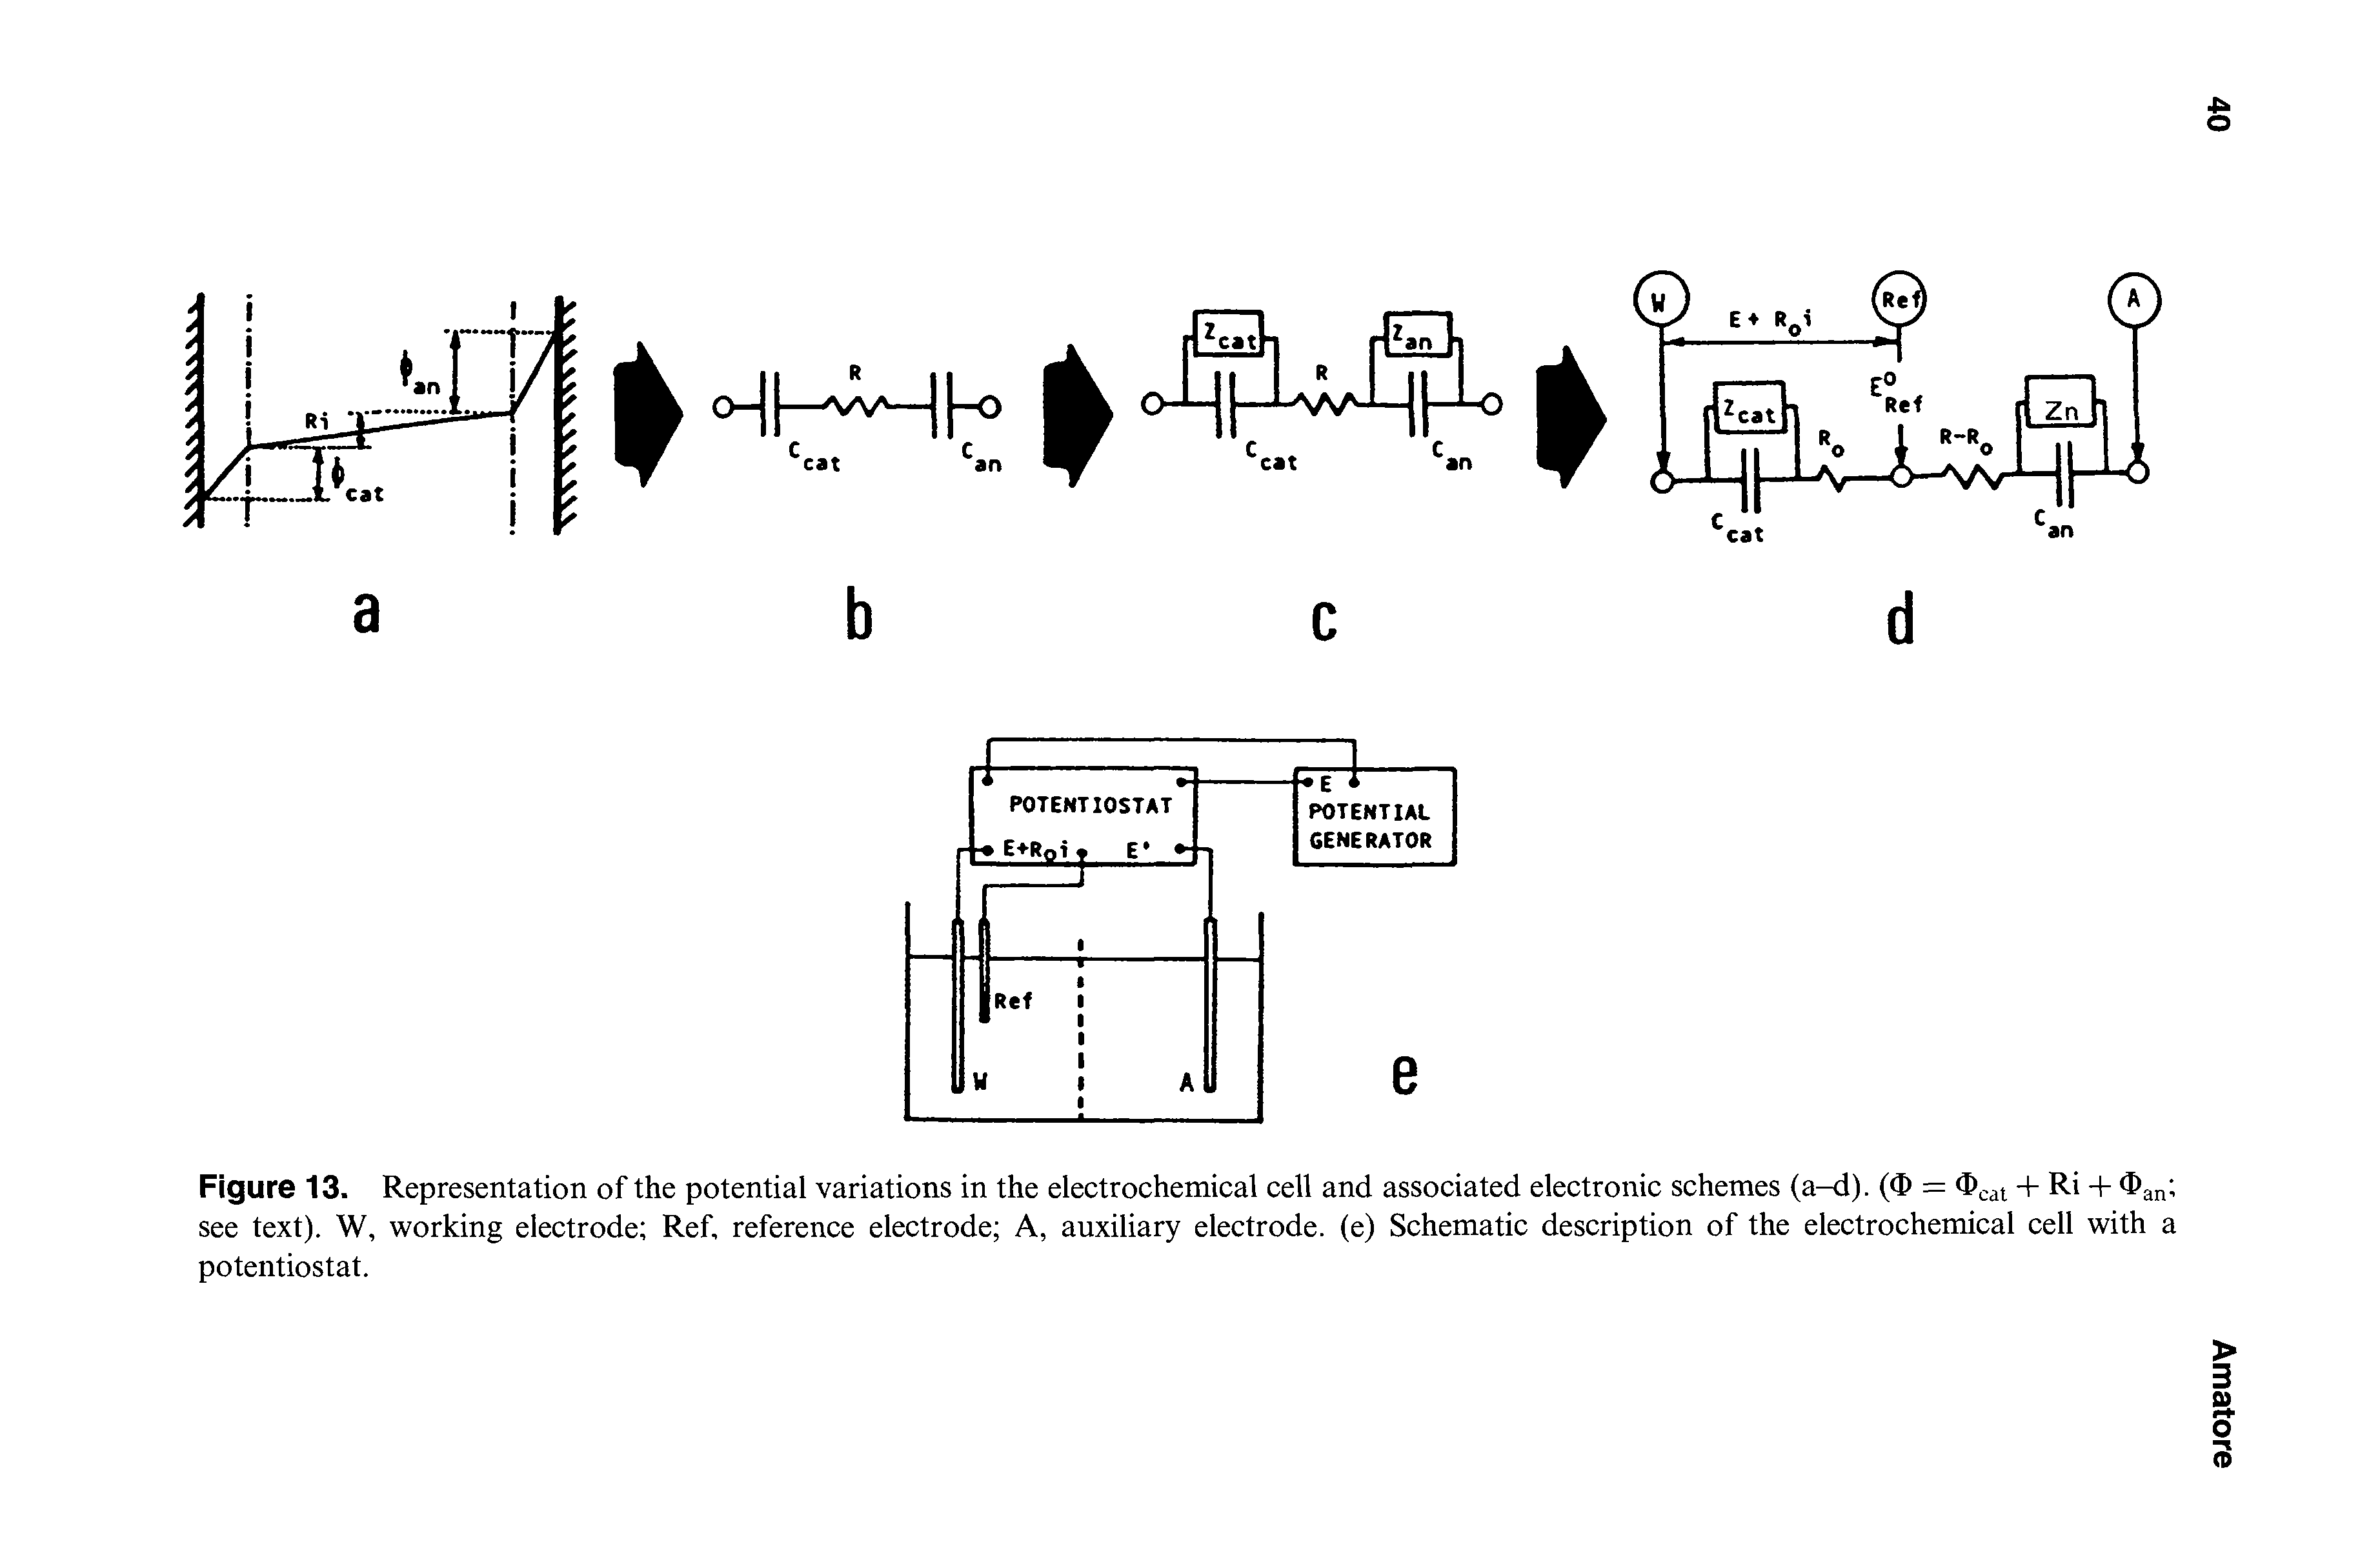 Figure 13. Representation of the potential variations in the electrochemical cell and associated electronic schemes (a-d). (<I> = <I>cat + Ri + <I>an see text). W, working electrode Ref, reference electrode A, auxiliary electrode, (e) Schematic description of the electrochemical cell with a potentiostat.